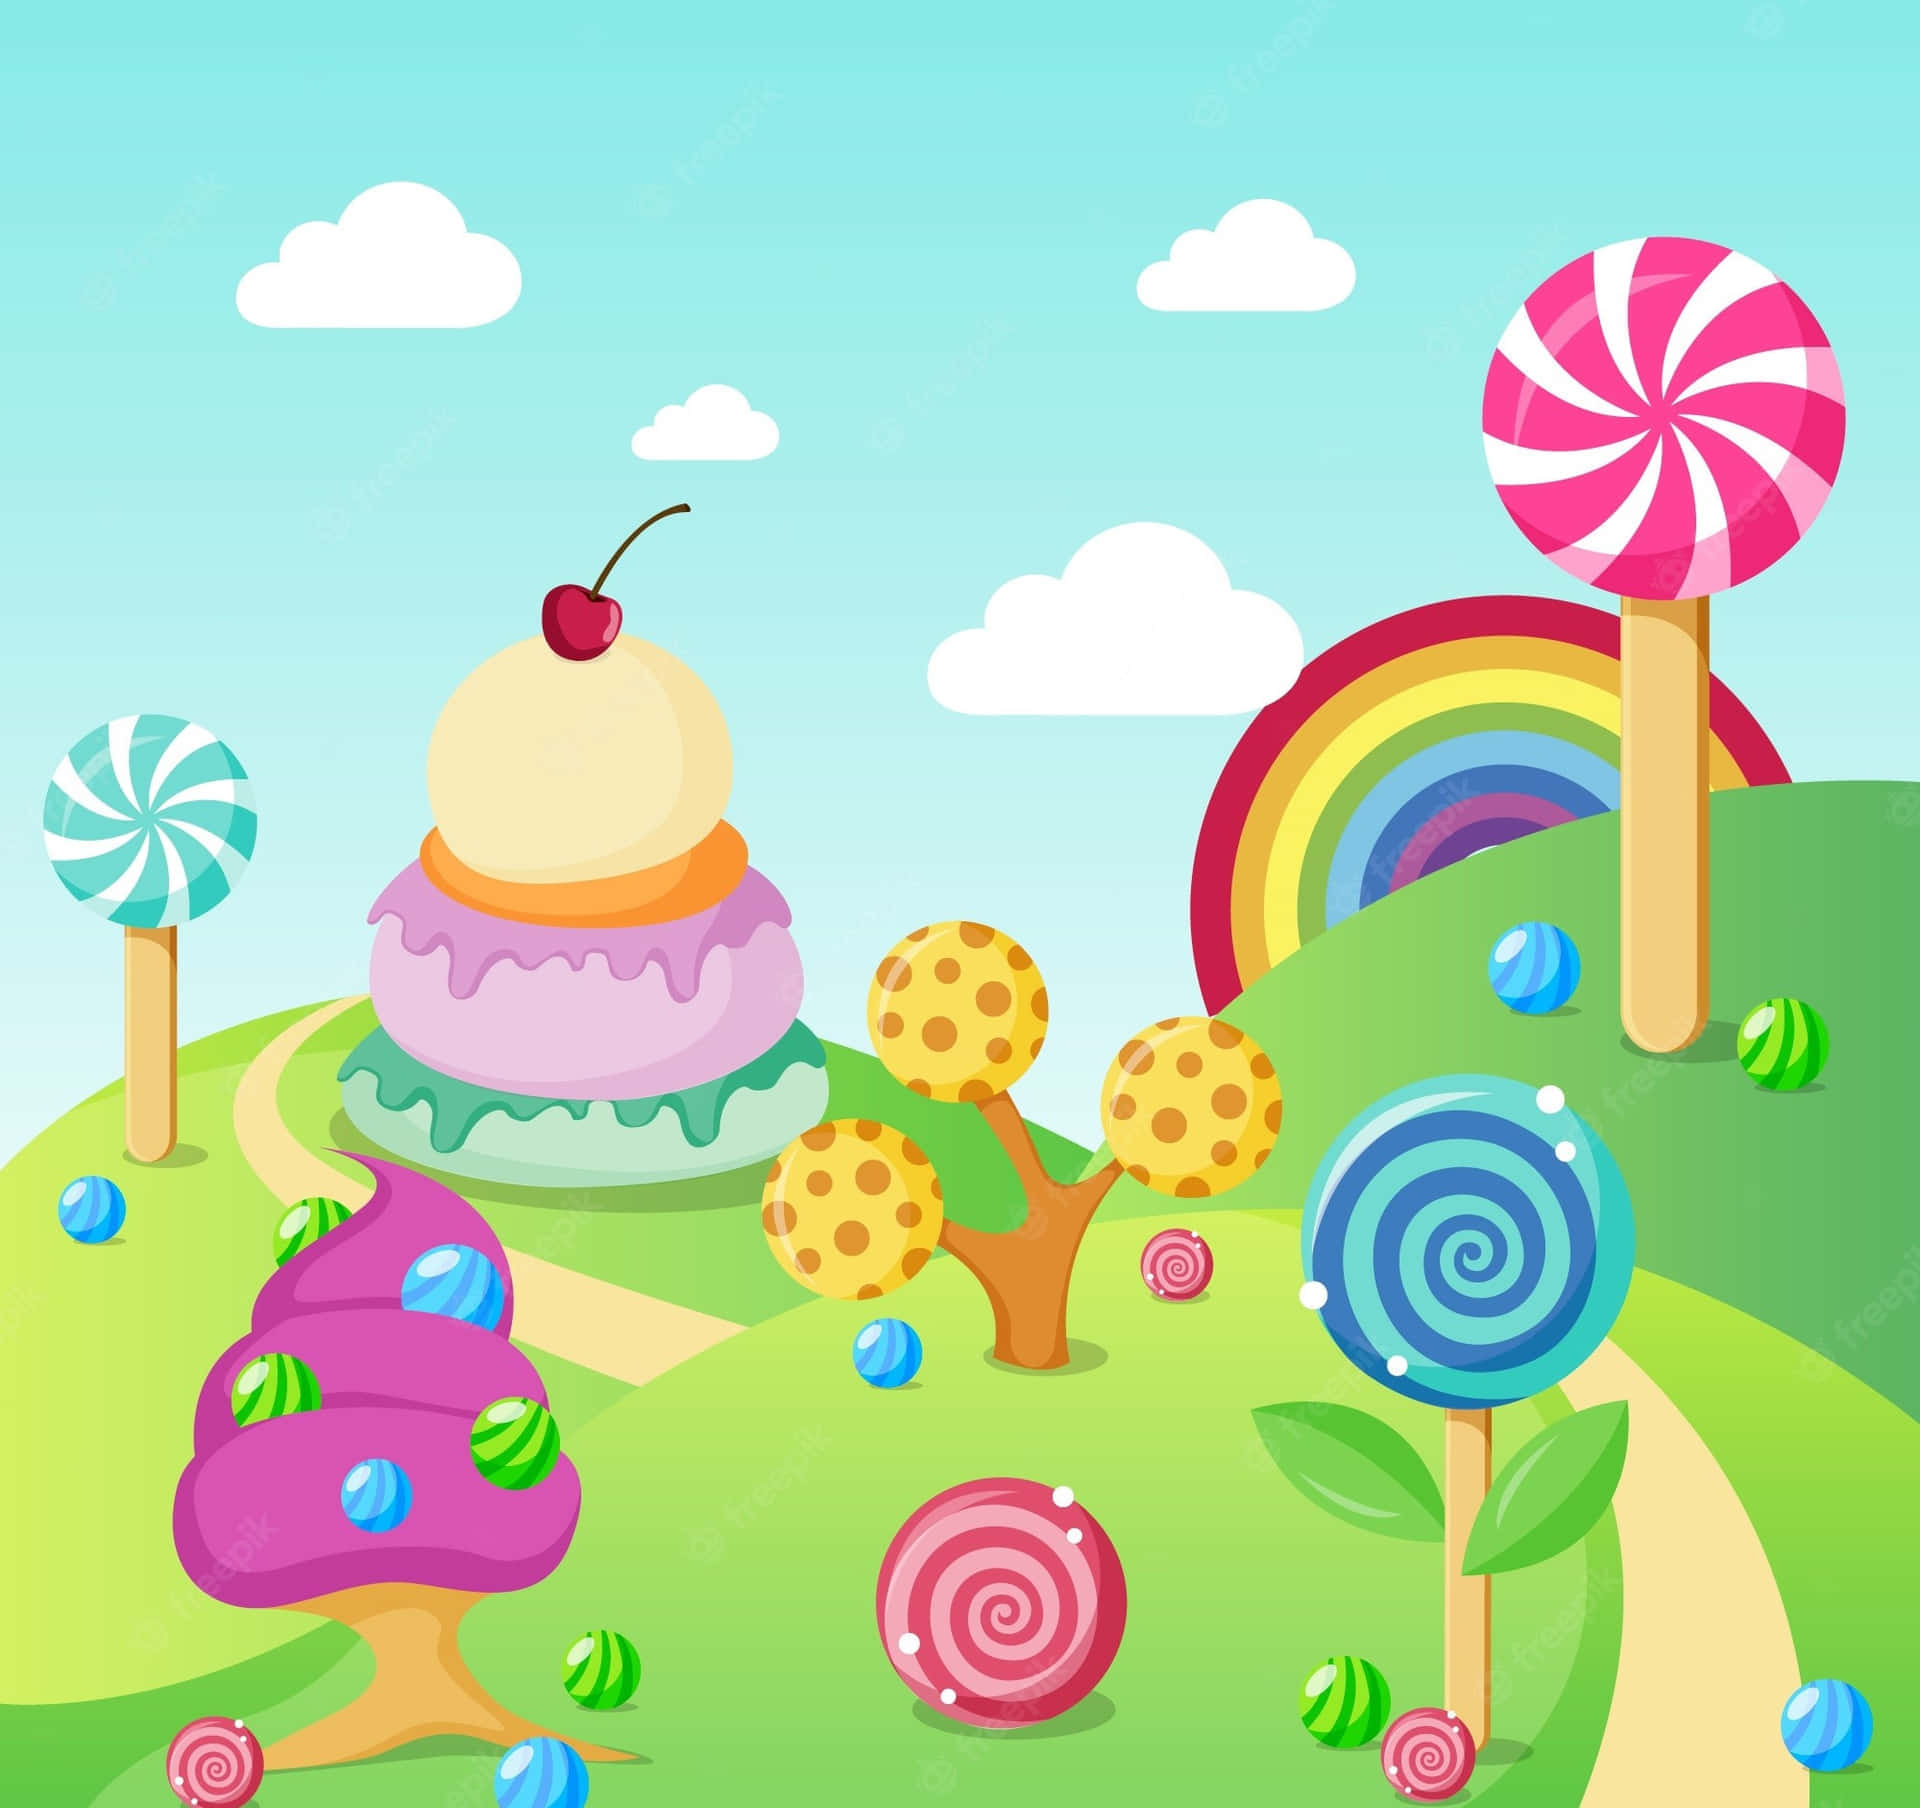 A Cartoon Candy Landscape With A Rainbow And Lollipops